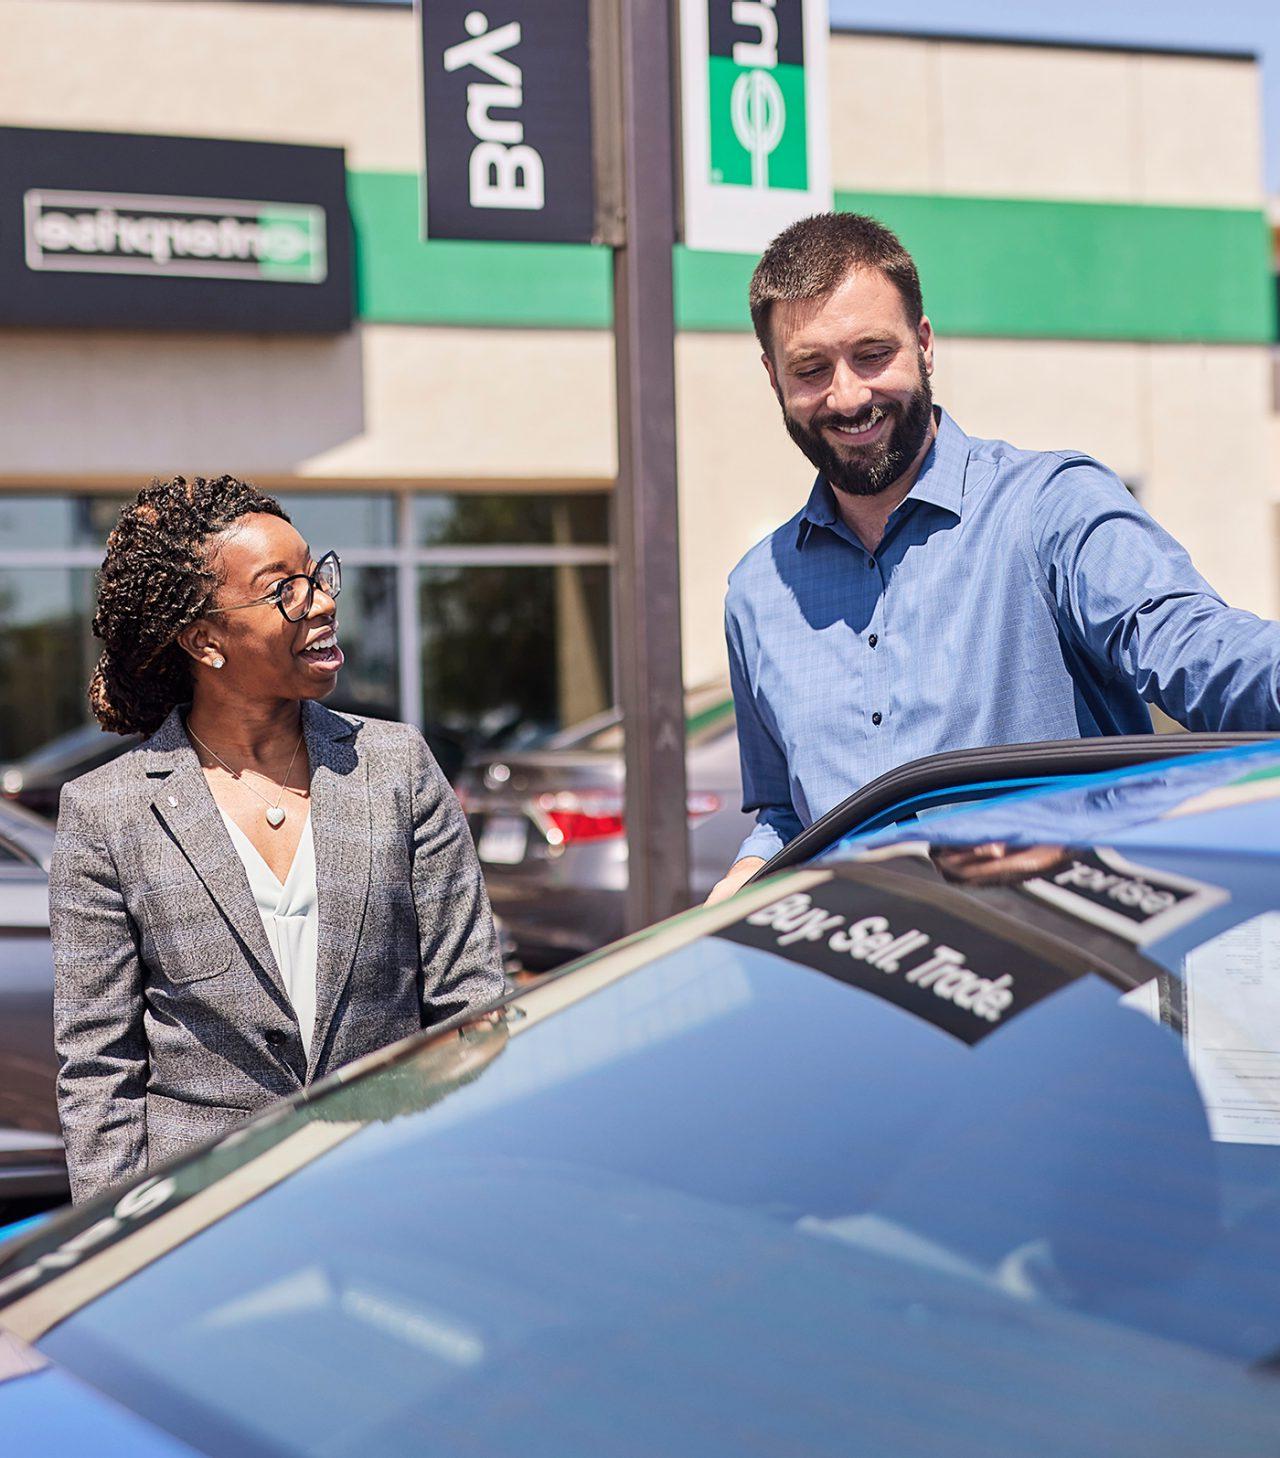 A gentleman, standing in front of a blue car, speaks with a lady at the Enterprise Car Sales lot.